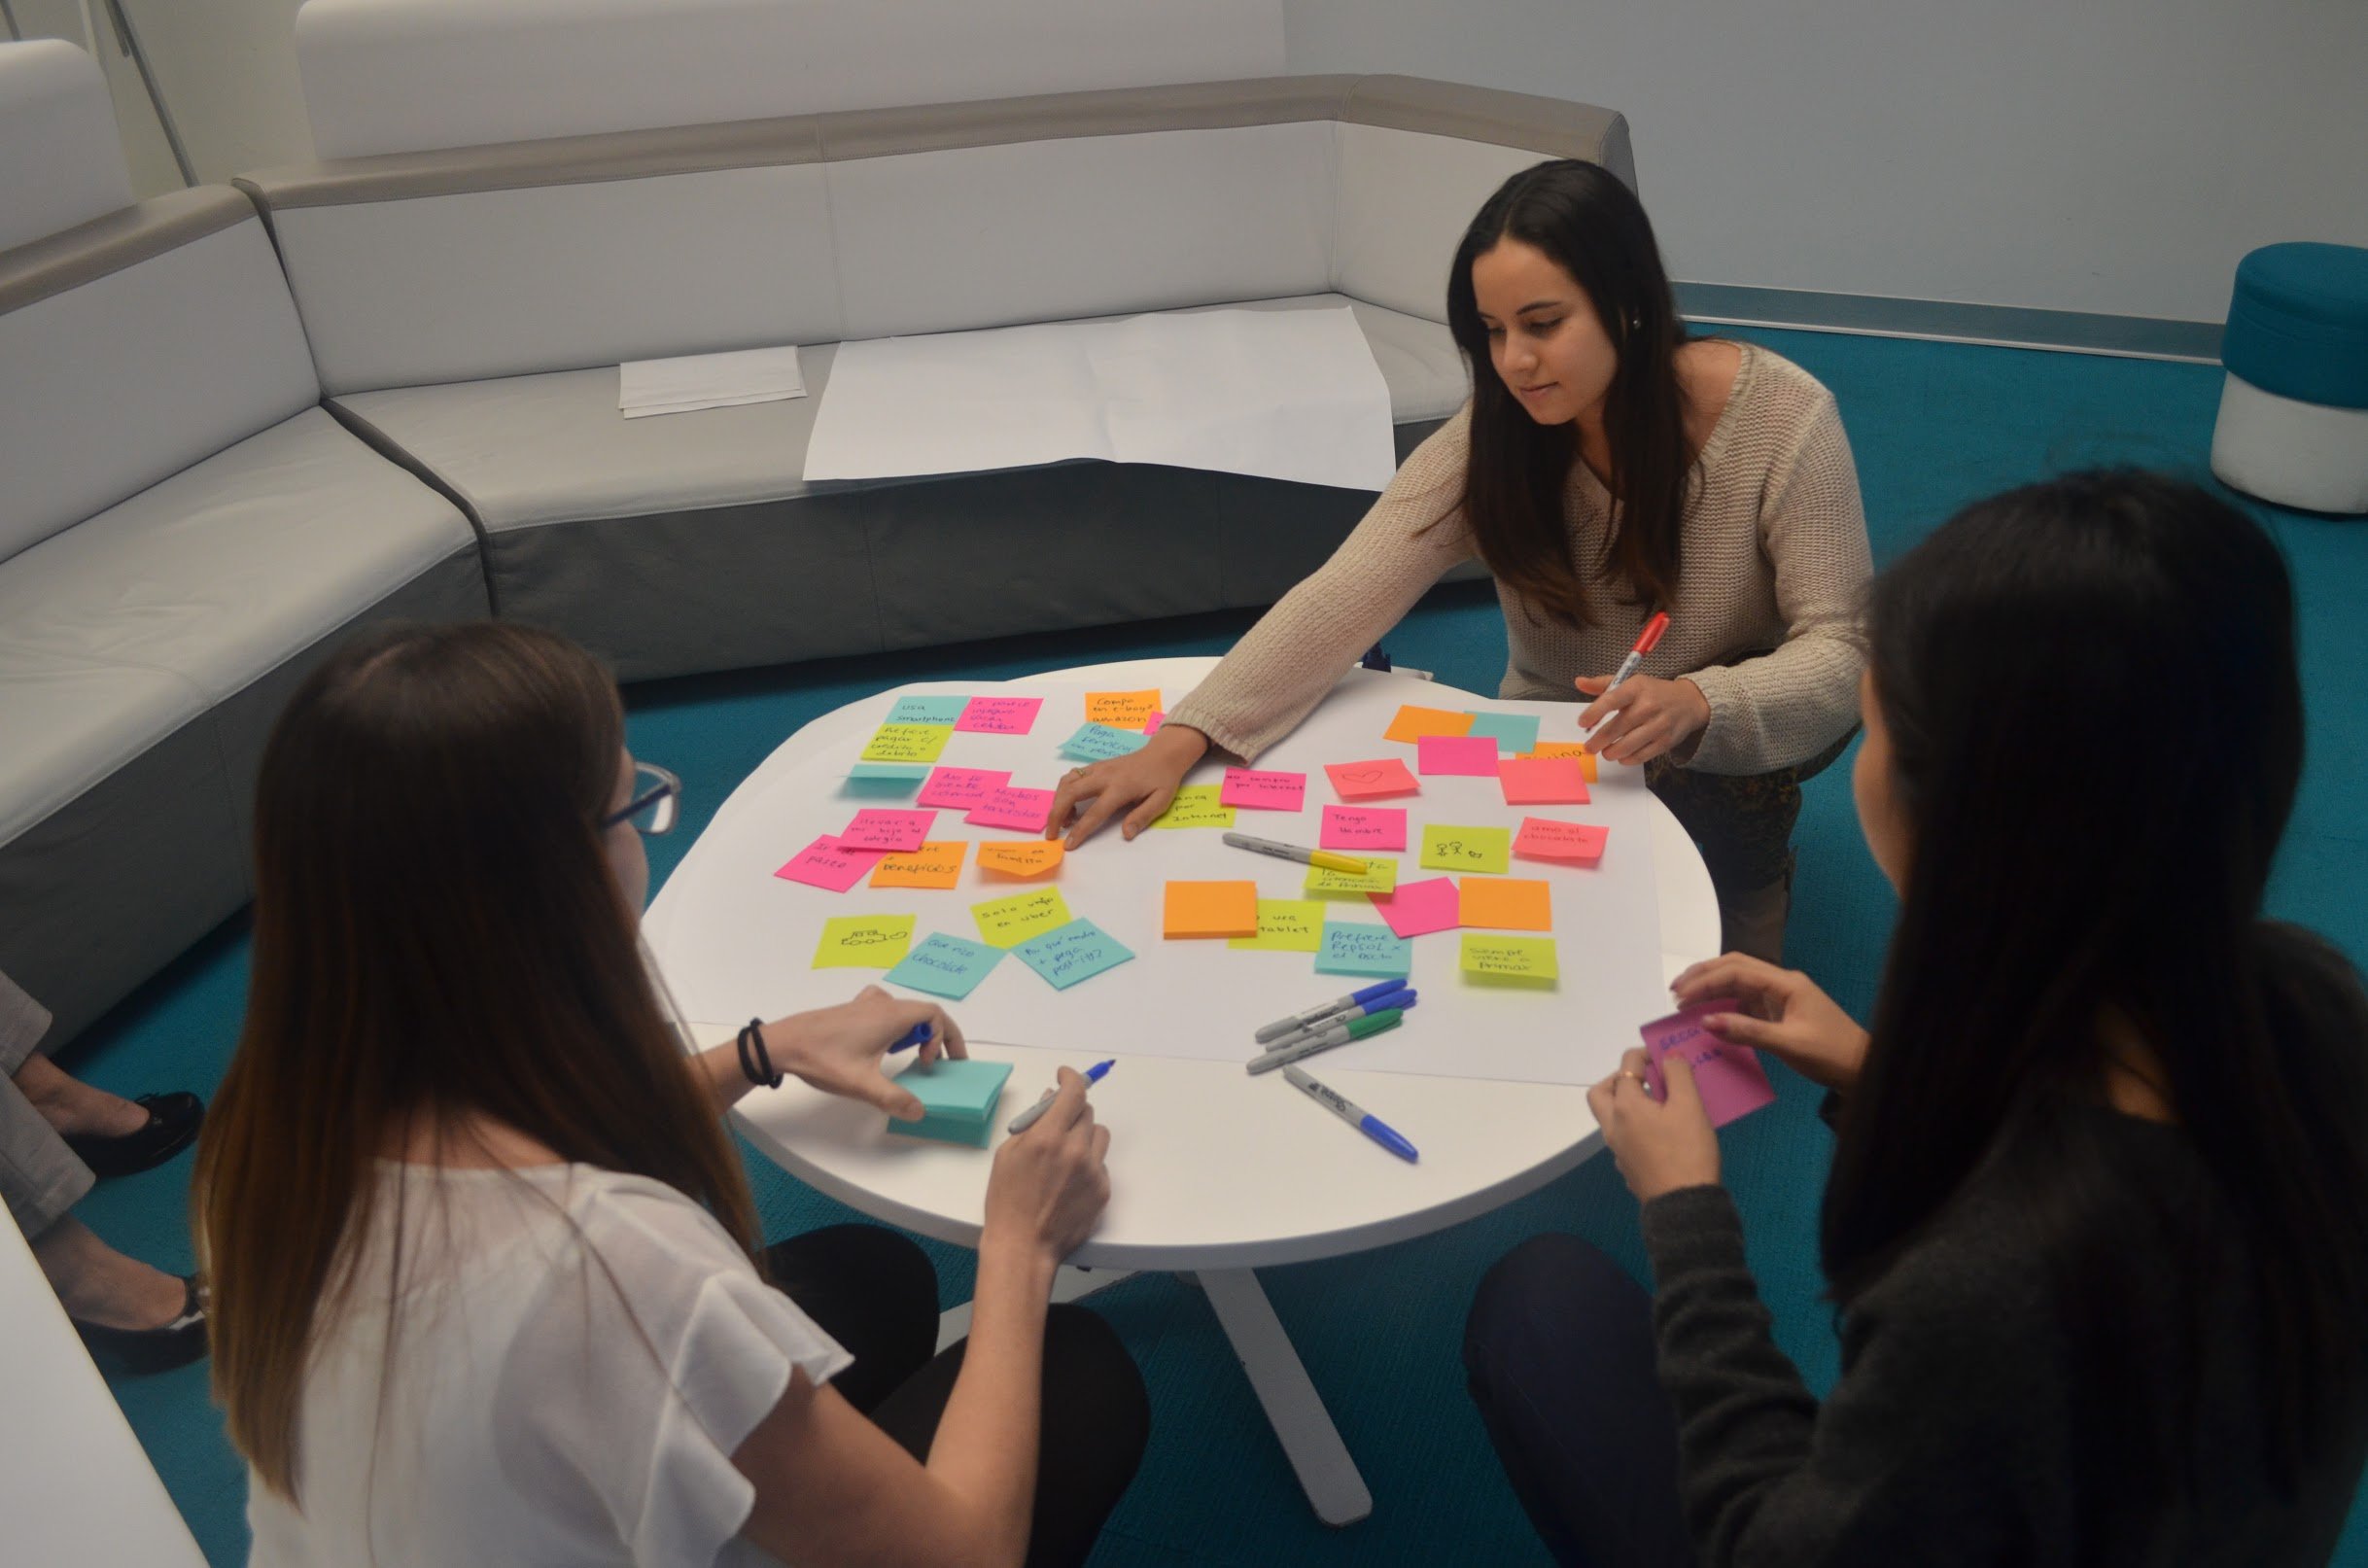 Prototyping in an ideation session with a technology company